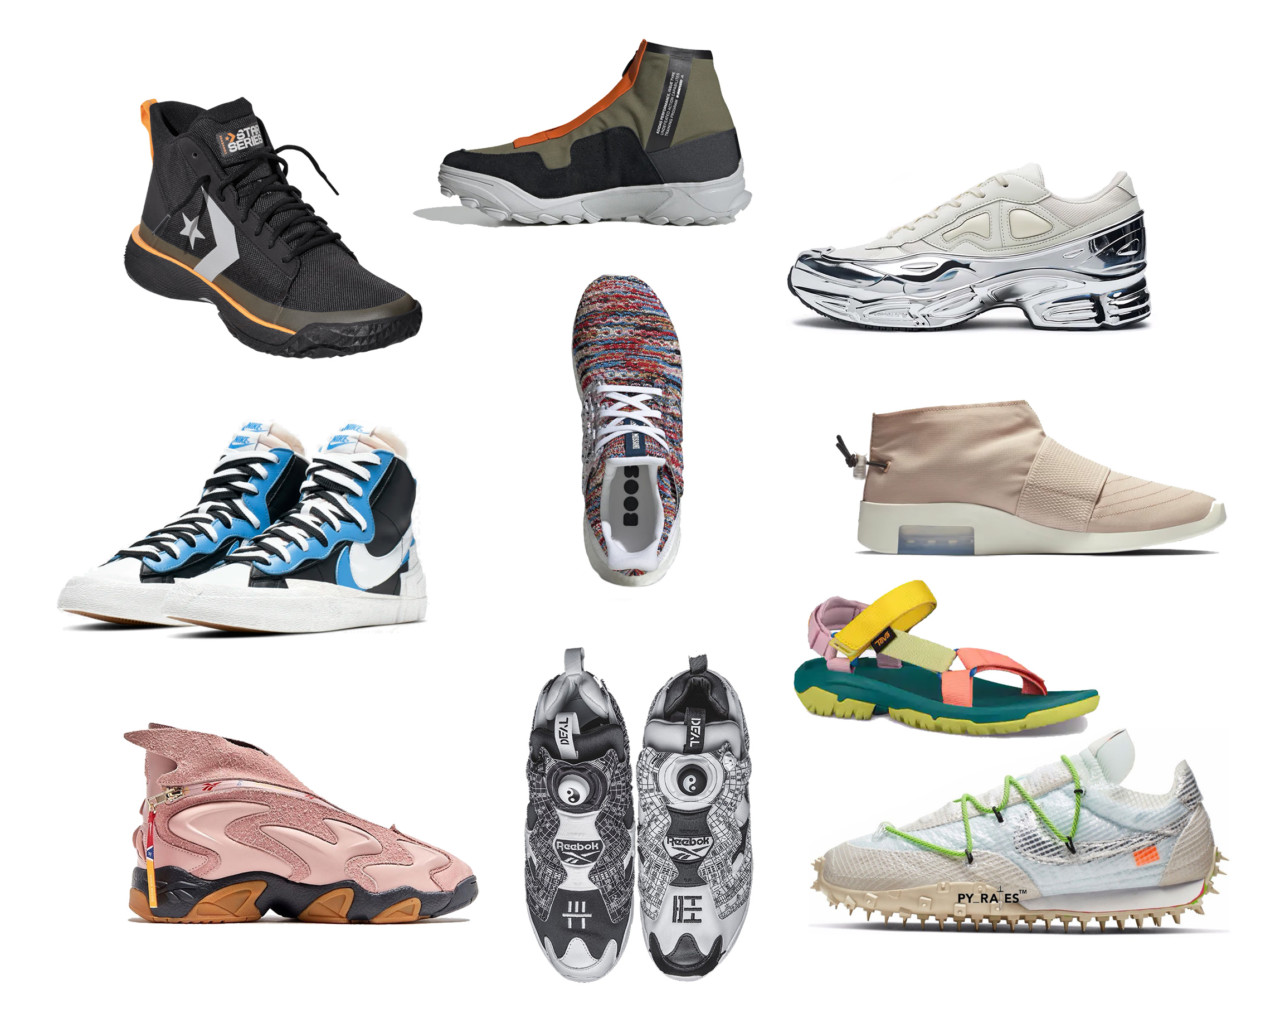 adidas collaborations with designers